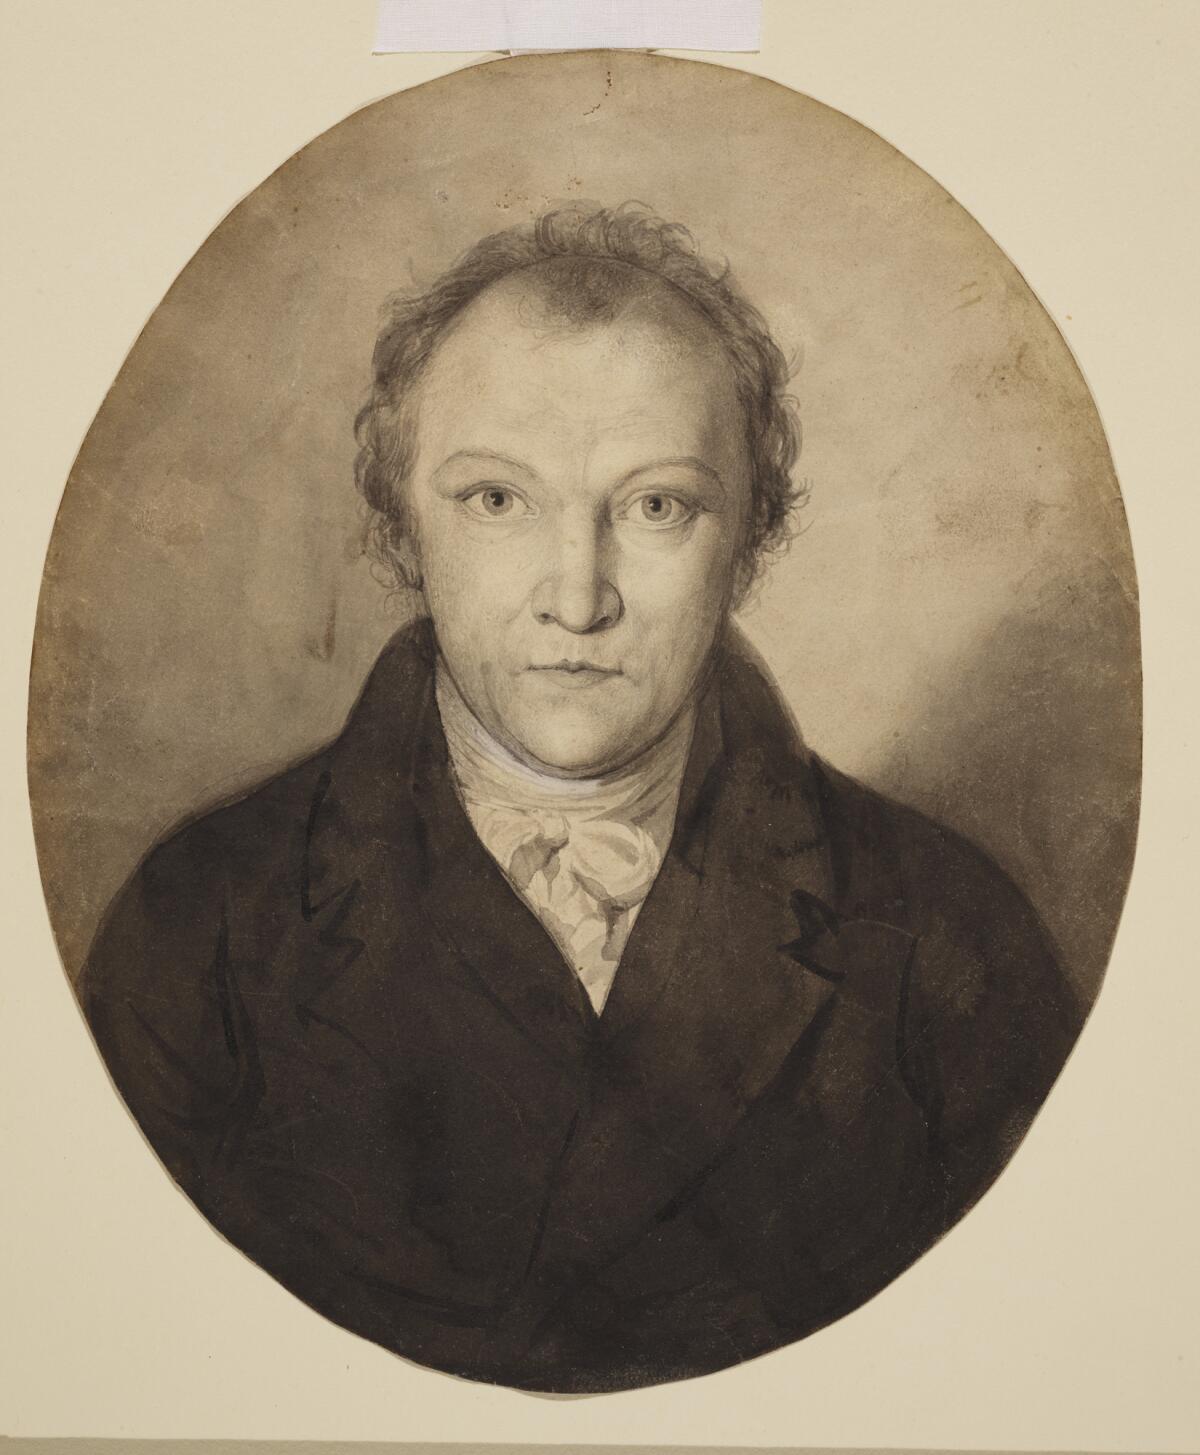 A self-portrait of William Blake with a fixed stare.